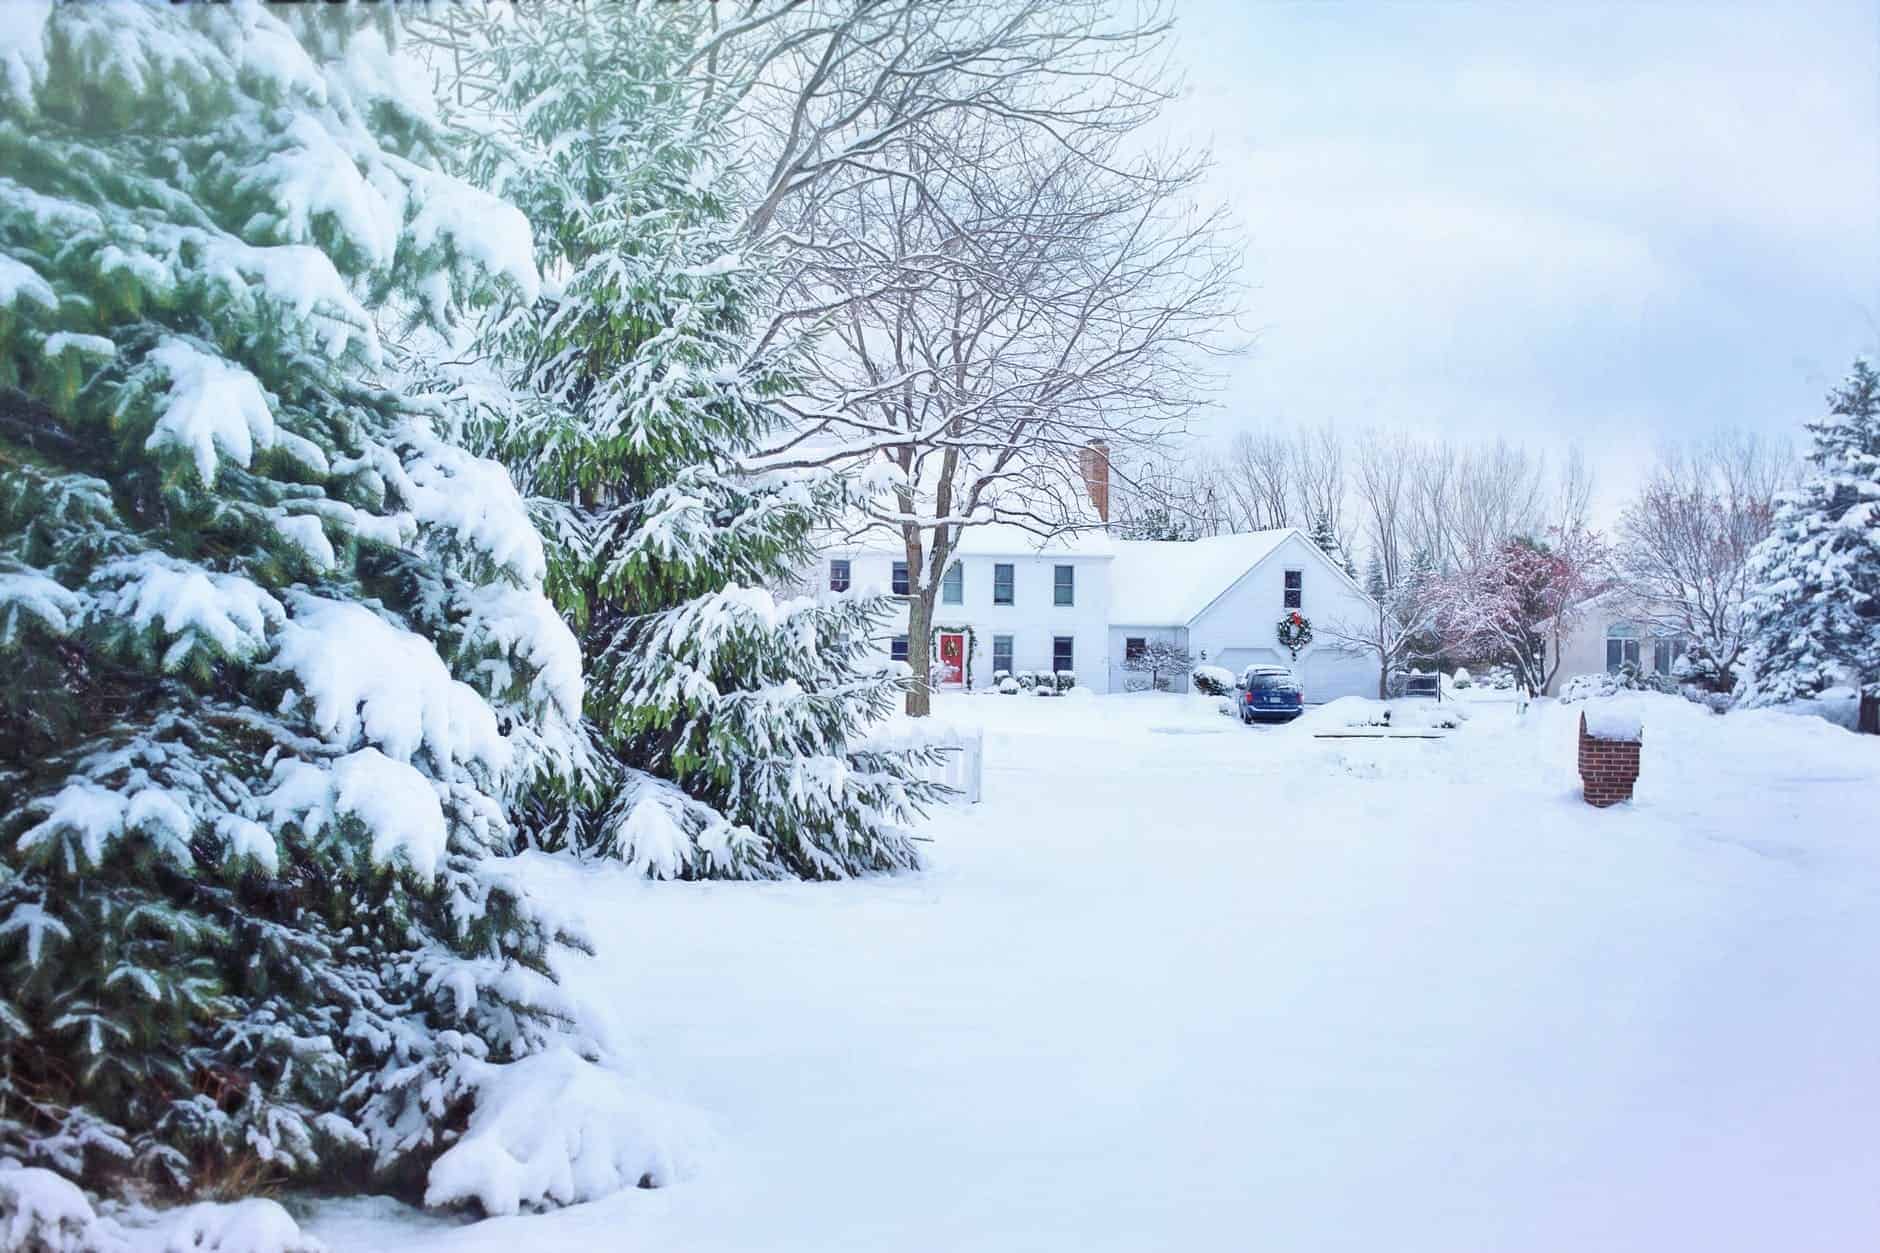 Snow filled pine trees, a snow filled yard, and a house surrounded by snow